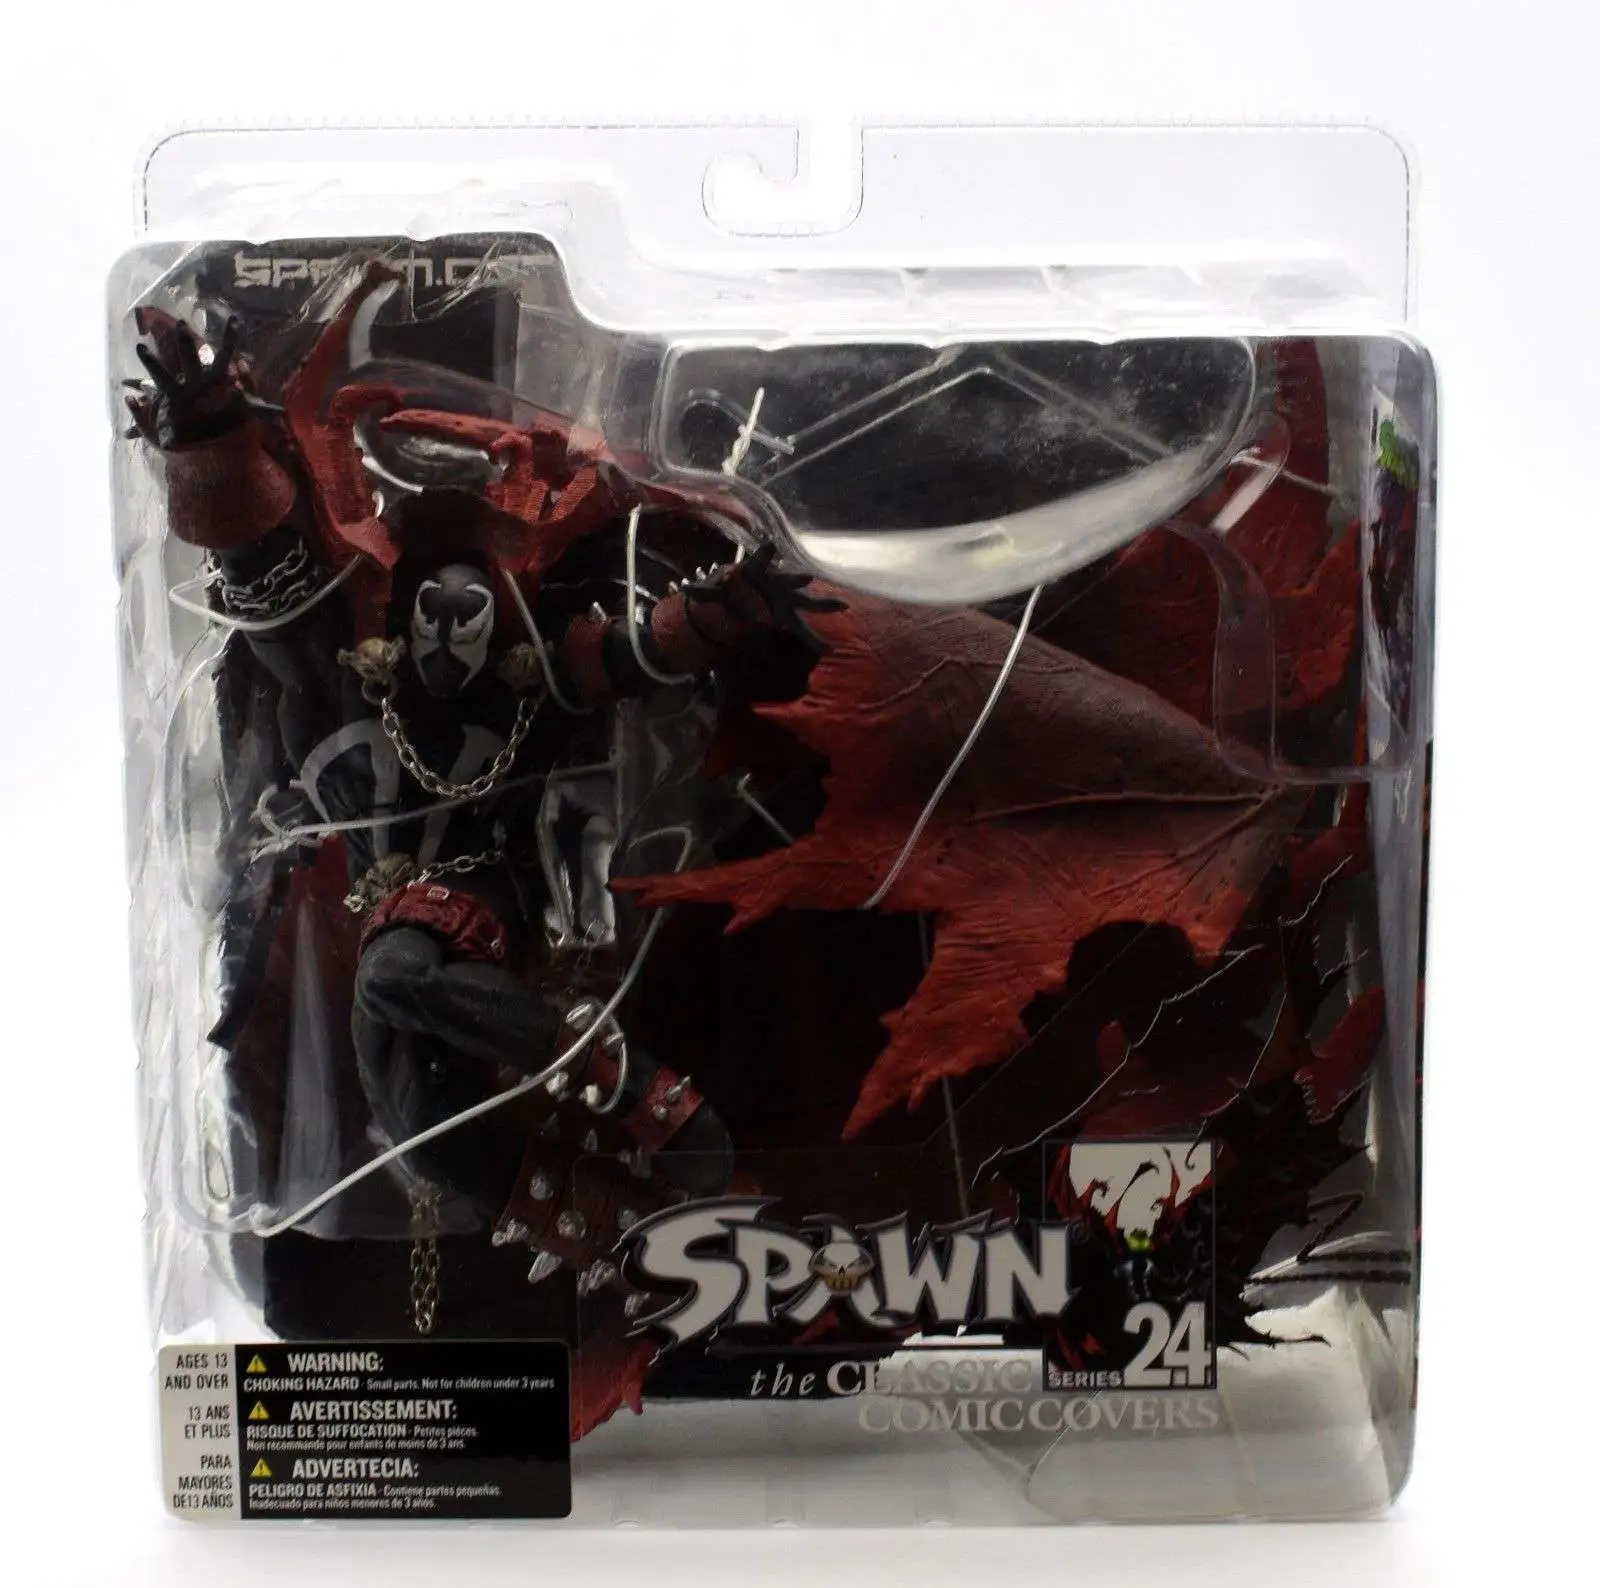 Classic Comic Covers 39 Spawn Series 24 Figure Book Image McFarlane Toys 2003 for sale online 